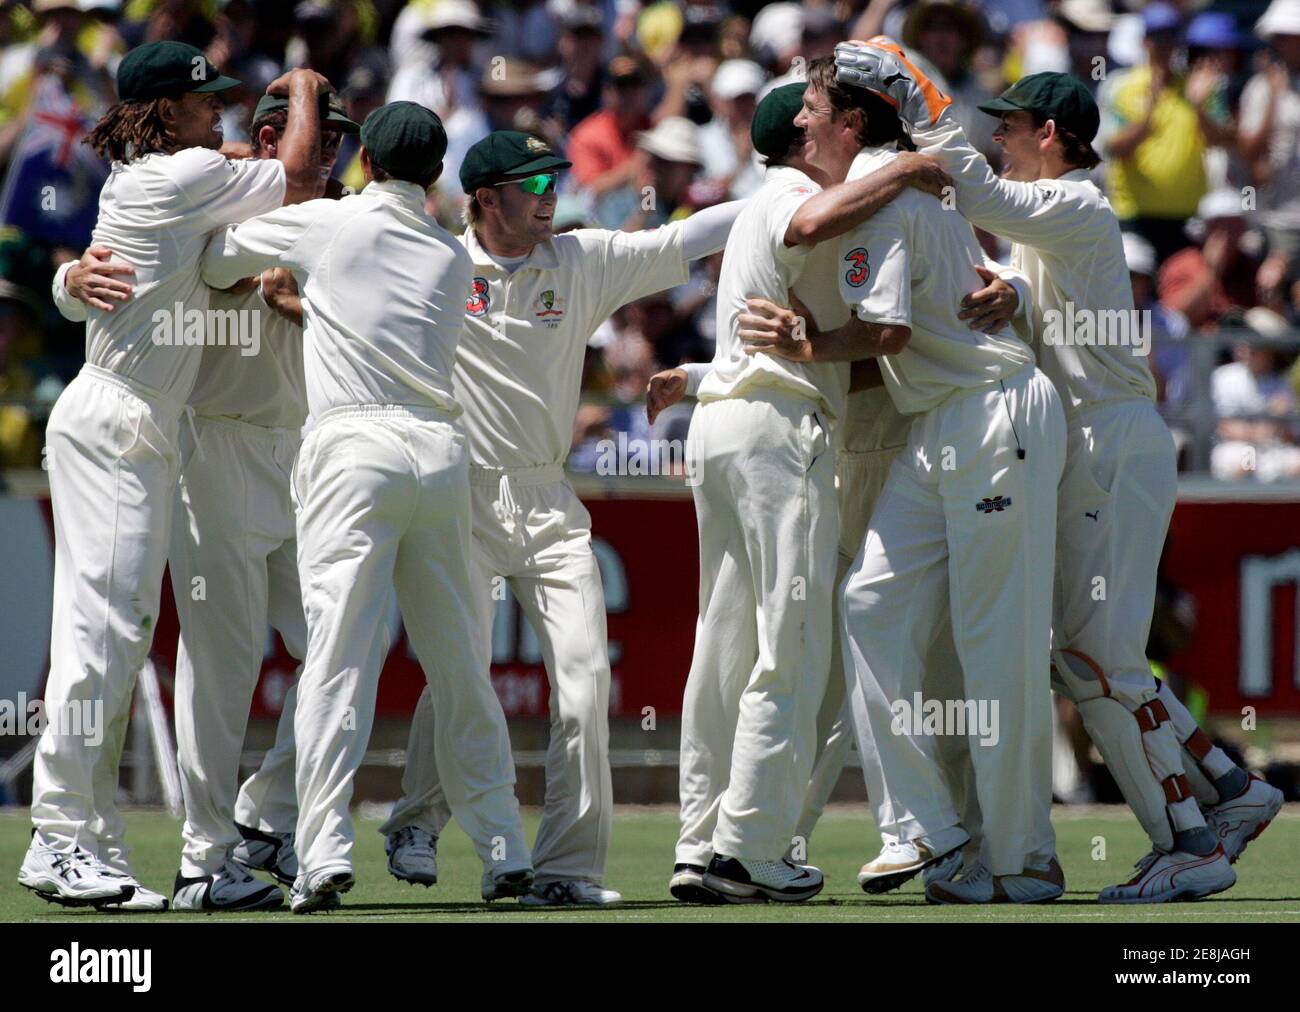 Australia's Glenn McGrath (2nd R) celebrates with team mates after having England's Paul Collingwood caught for 11 runs on the second day of the third Ashes test in Perth December 15, 2006. MOBILES OUT  EDITORIAL USE ONLY  REUTERS/Will Burgess  (AUSTRALIA) Stock Photo